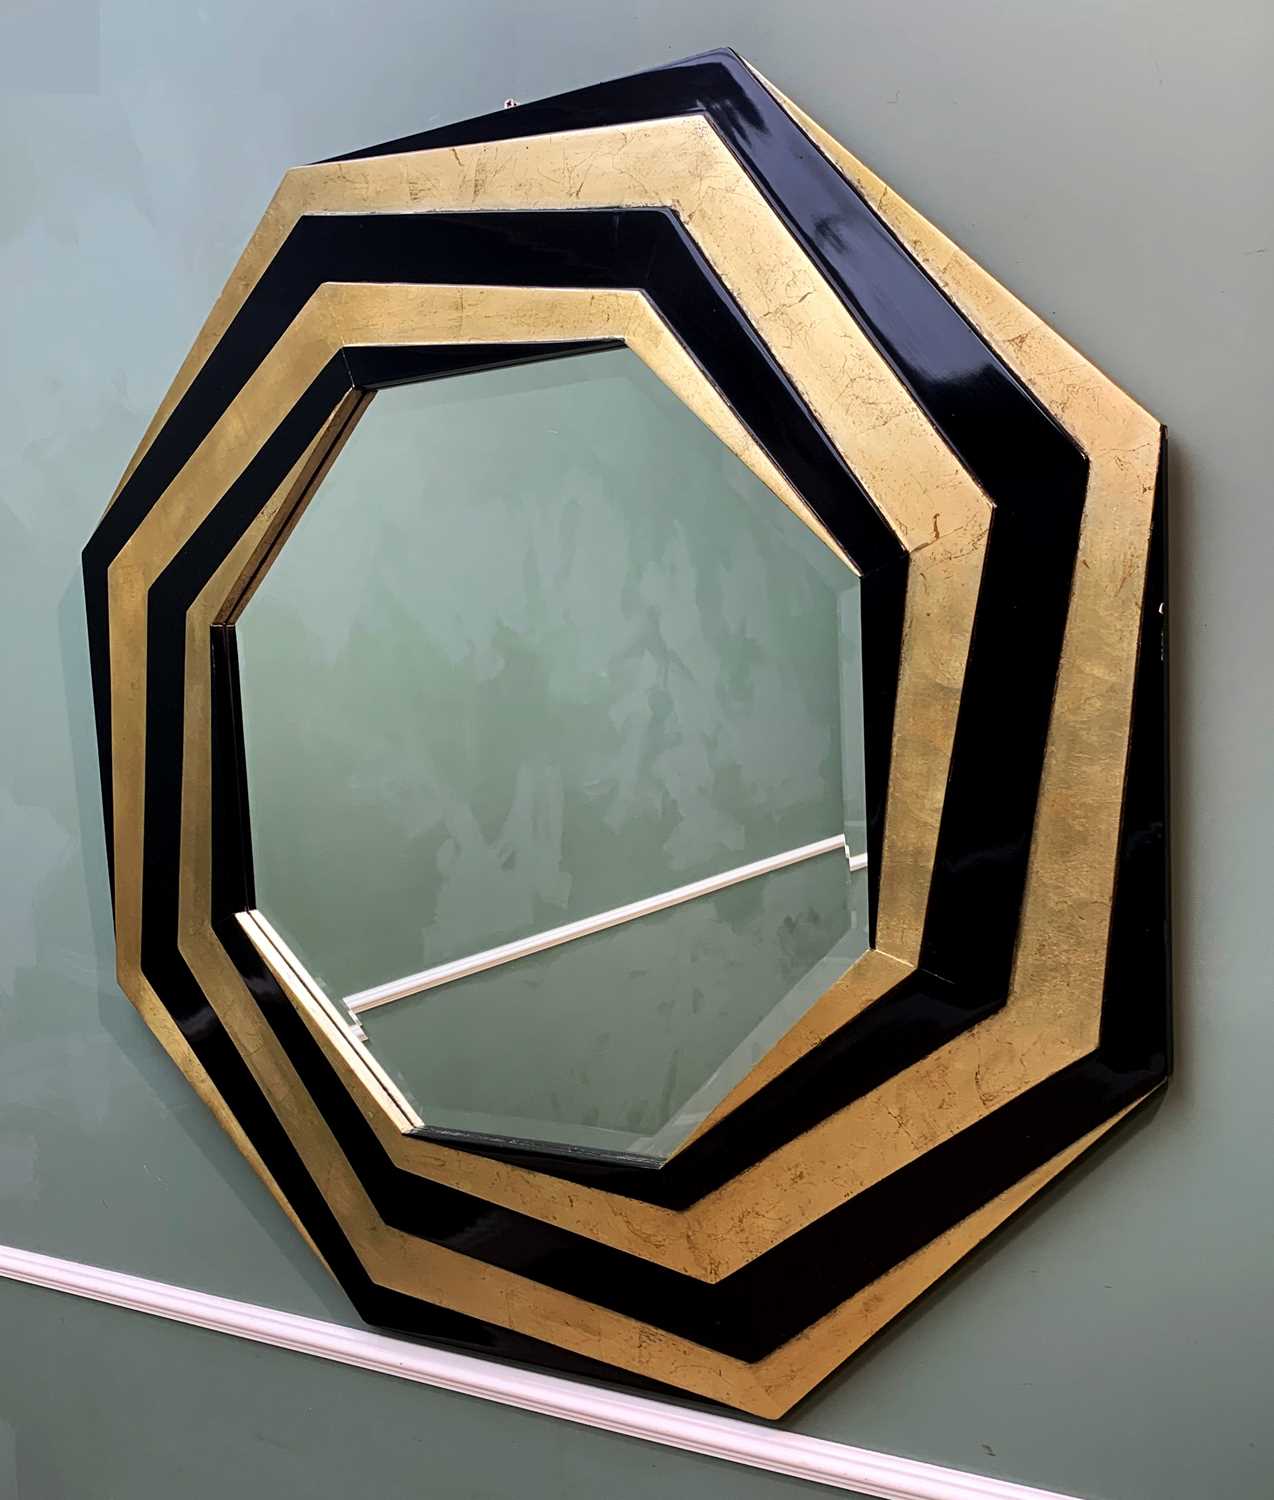 LARGE CONTEMPORARY CHRISTOPHER GUY OCTAGON MIRROR, black lacquer and gilt geometric surround, 103h x - Image 2 of 11